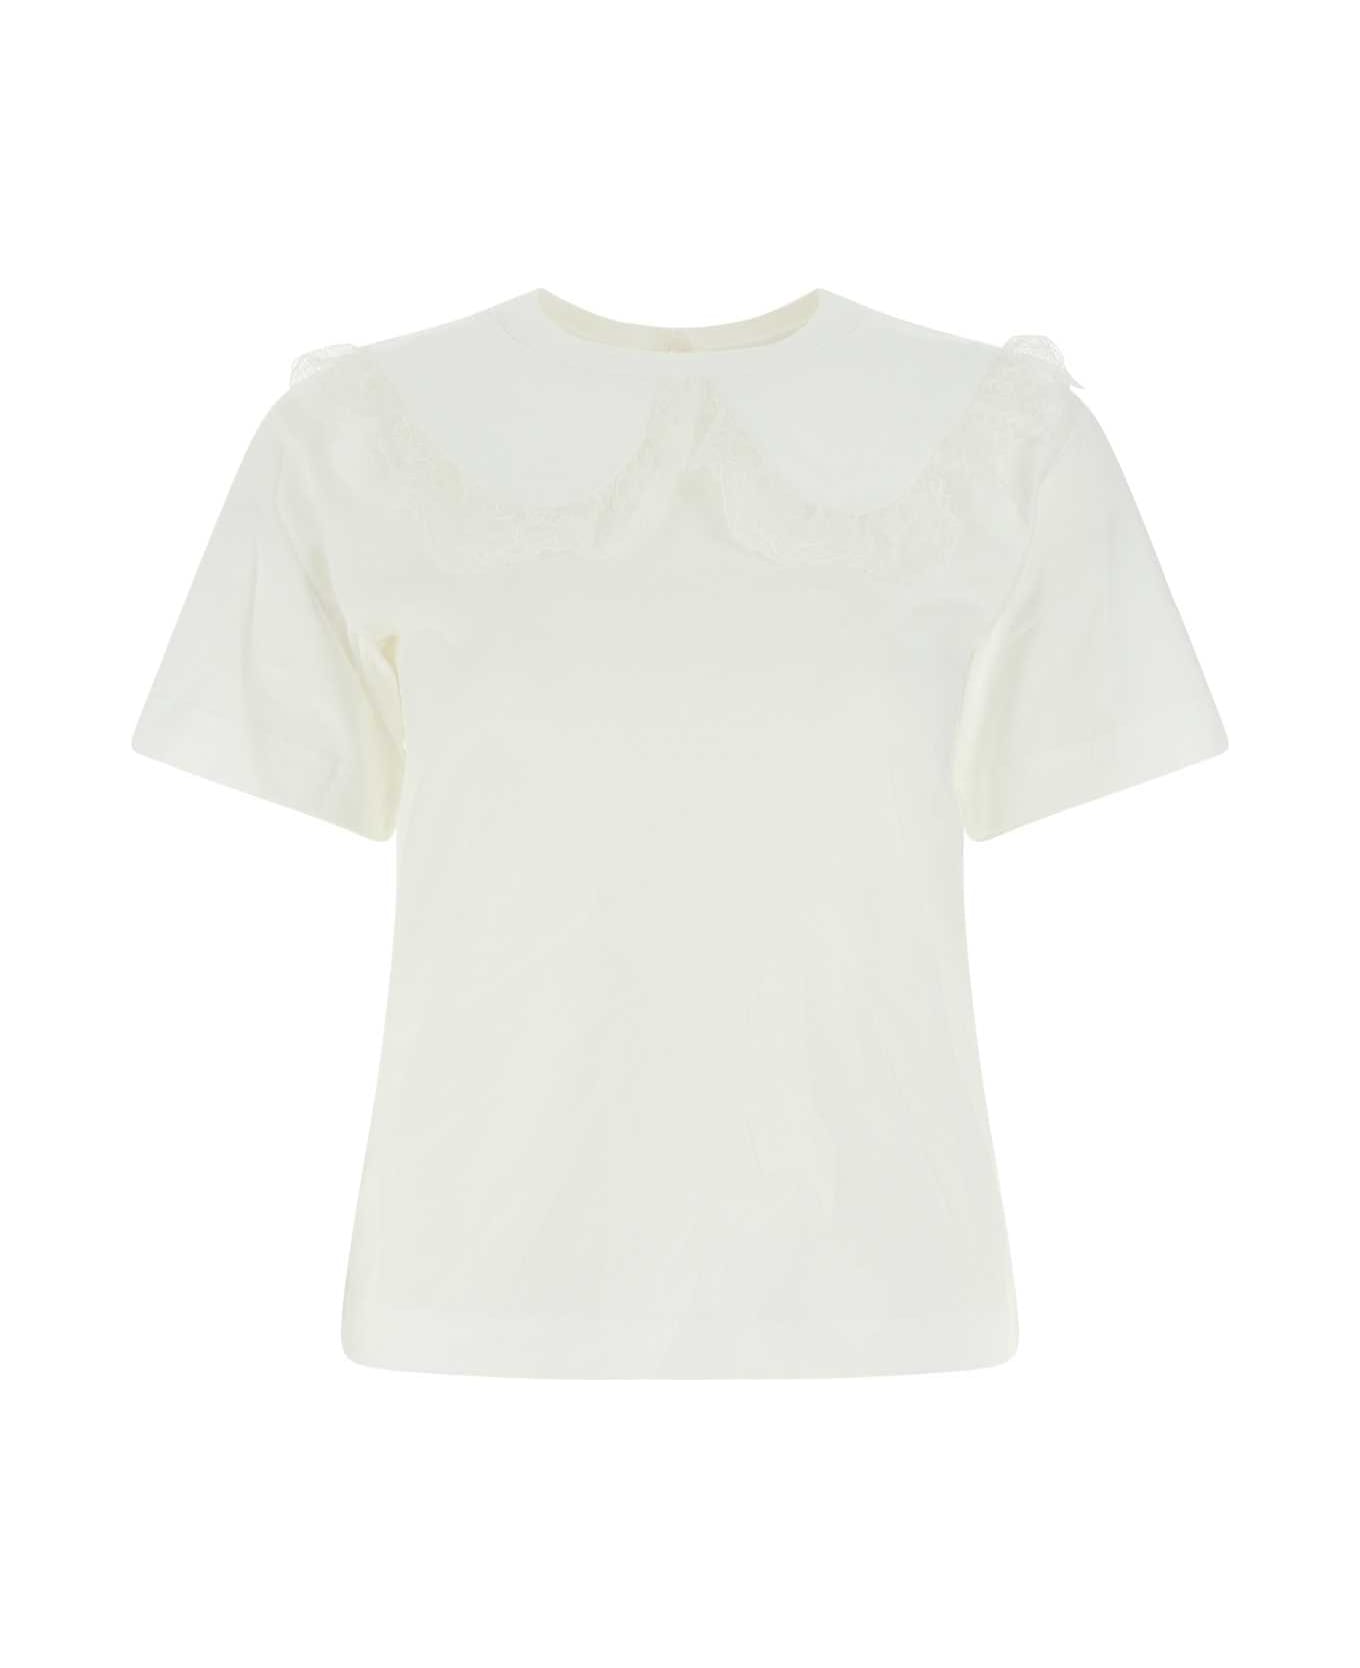 See by Chloé White Cotton T-shirt - 101 Tシャツ